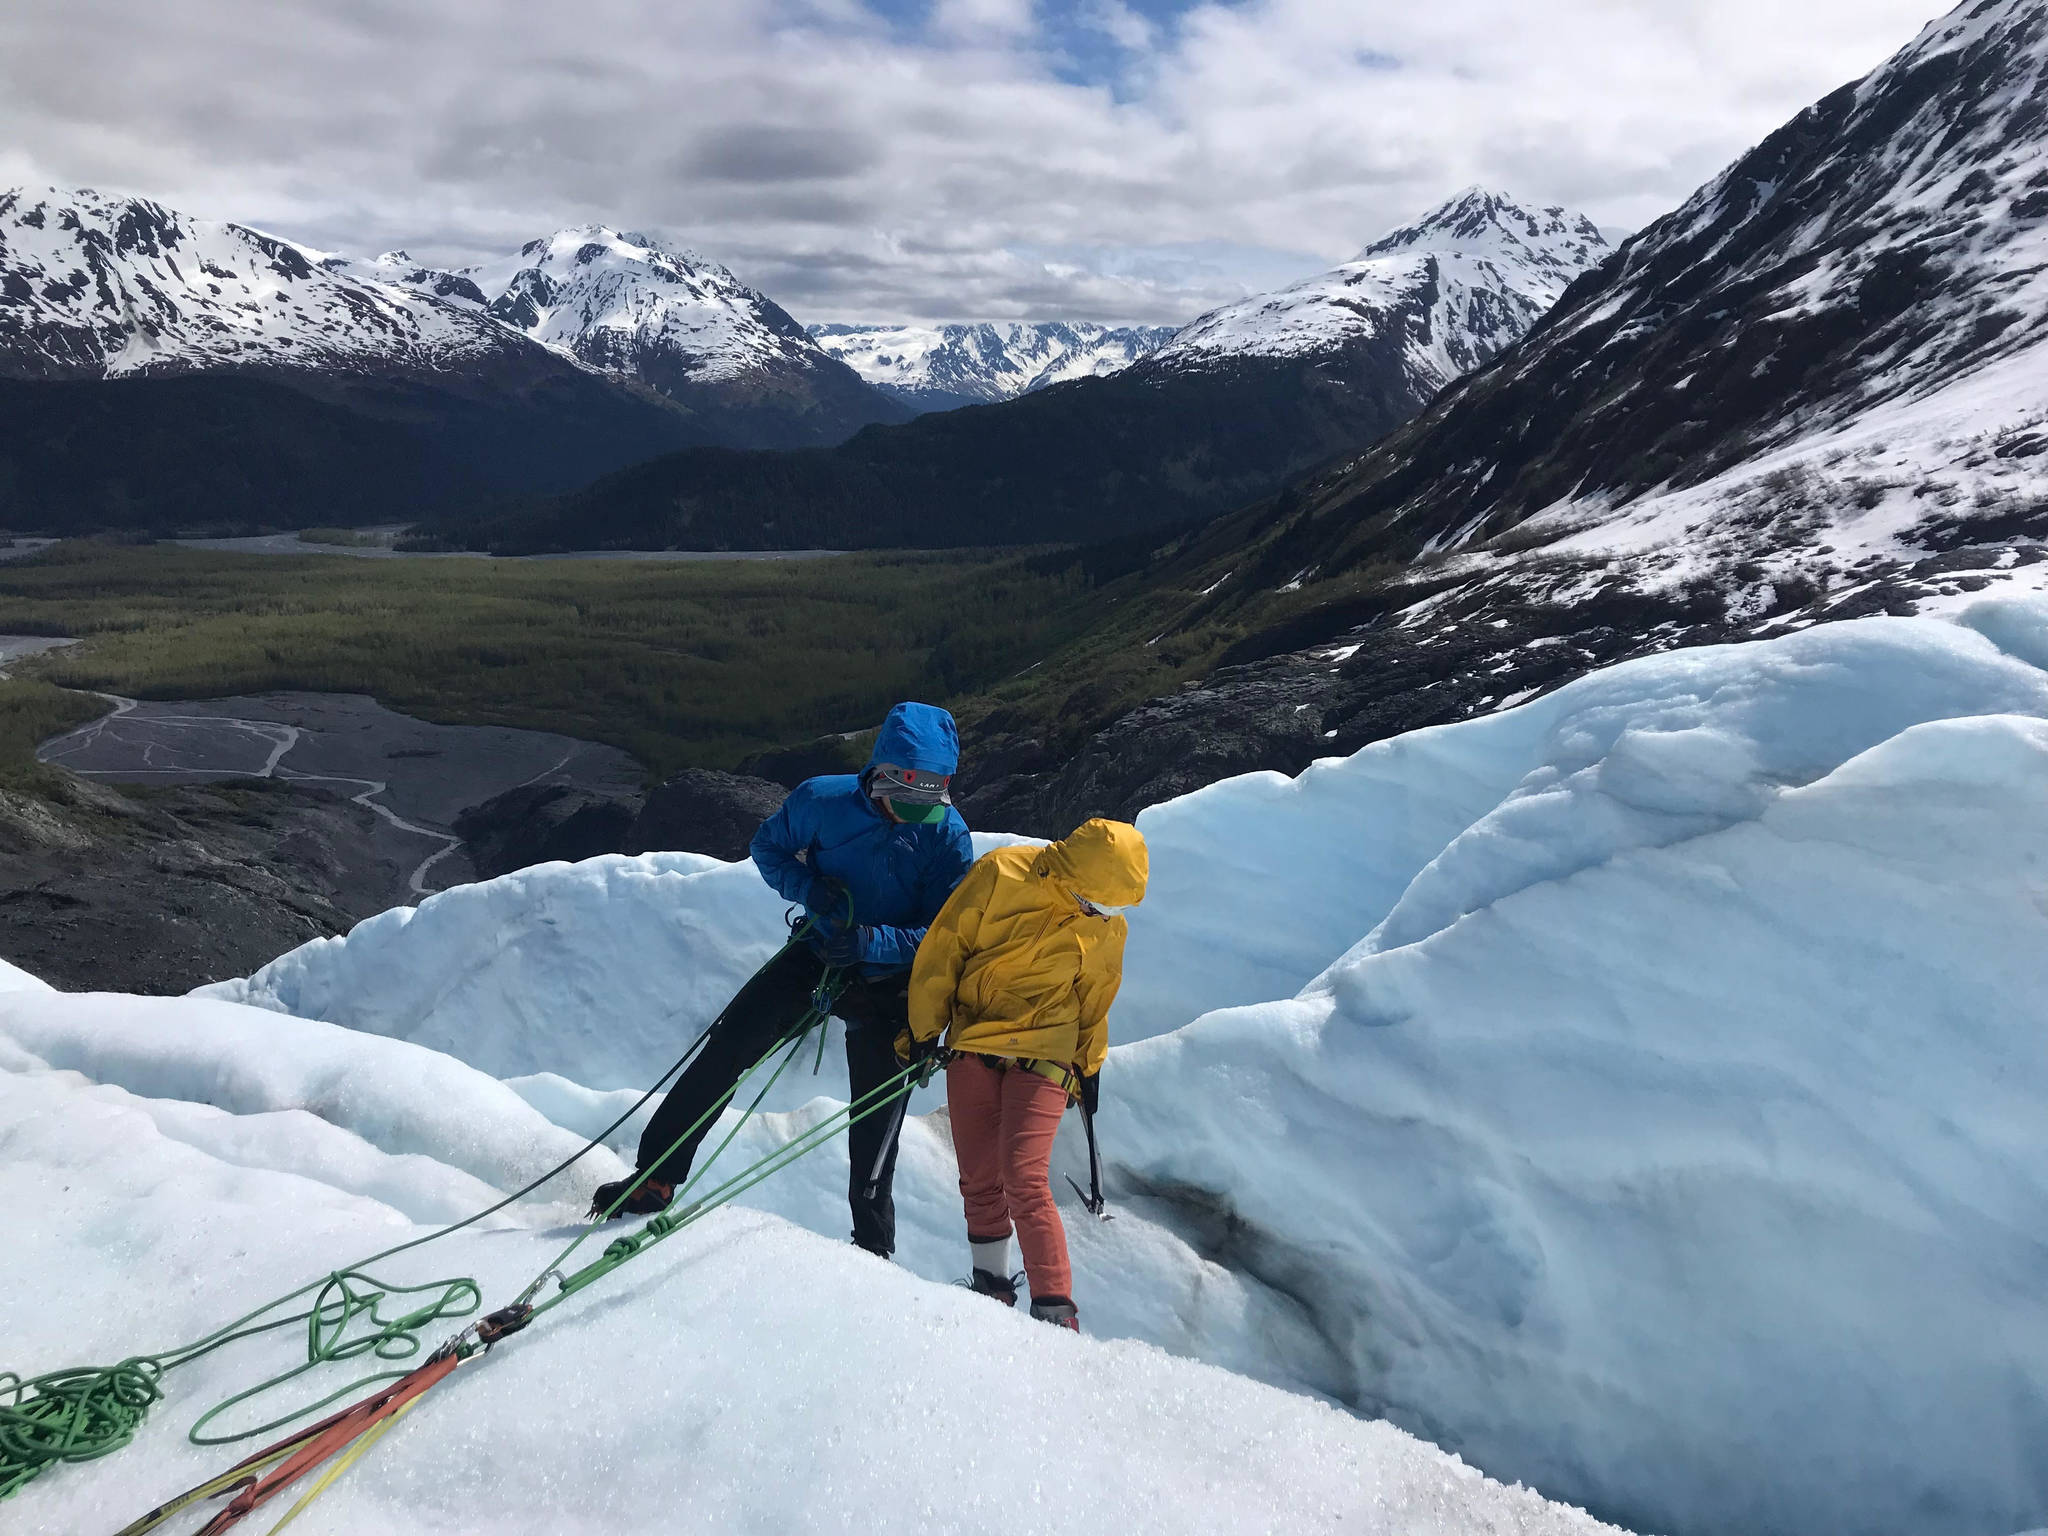 Exit Glacier Guides operates daily ice climbing trips on Exit Glacier outside of Seward during the summer months. A guide is seen here, leading a visitor to Seward on a climbing trip into a glacial crevasse in summer 2018. (Photo by Kat Sorensen/Peninsula Clarion).